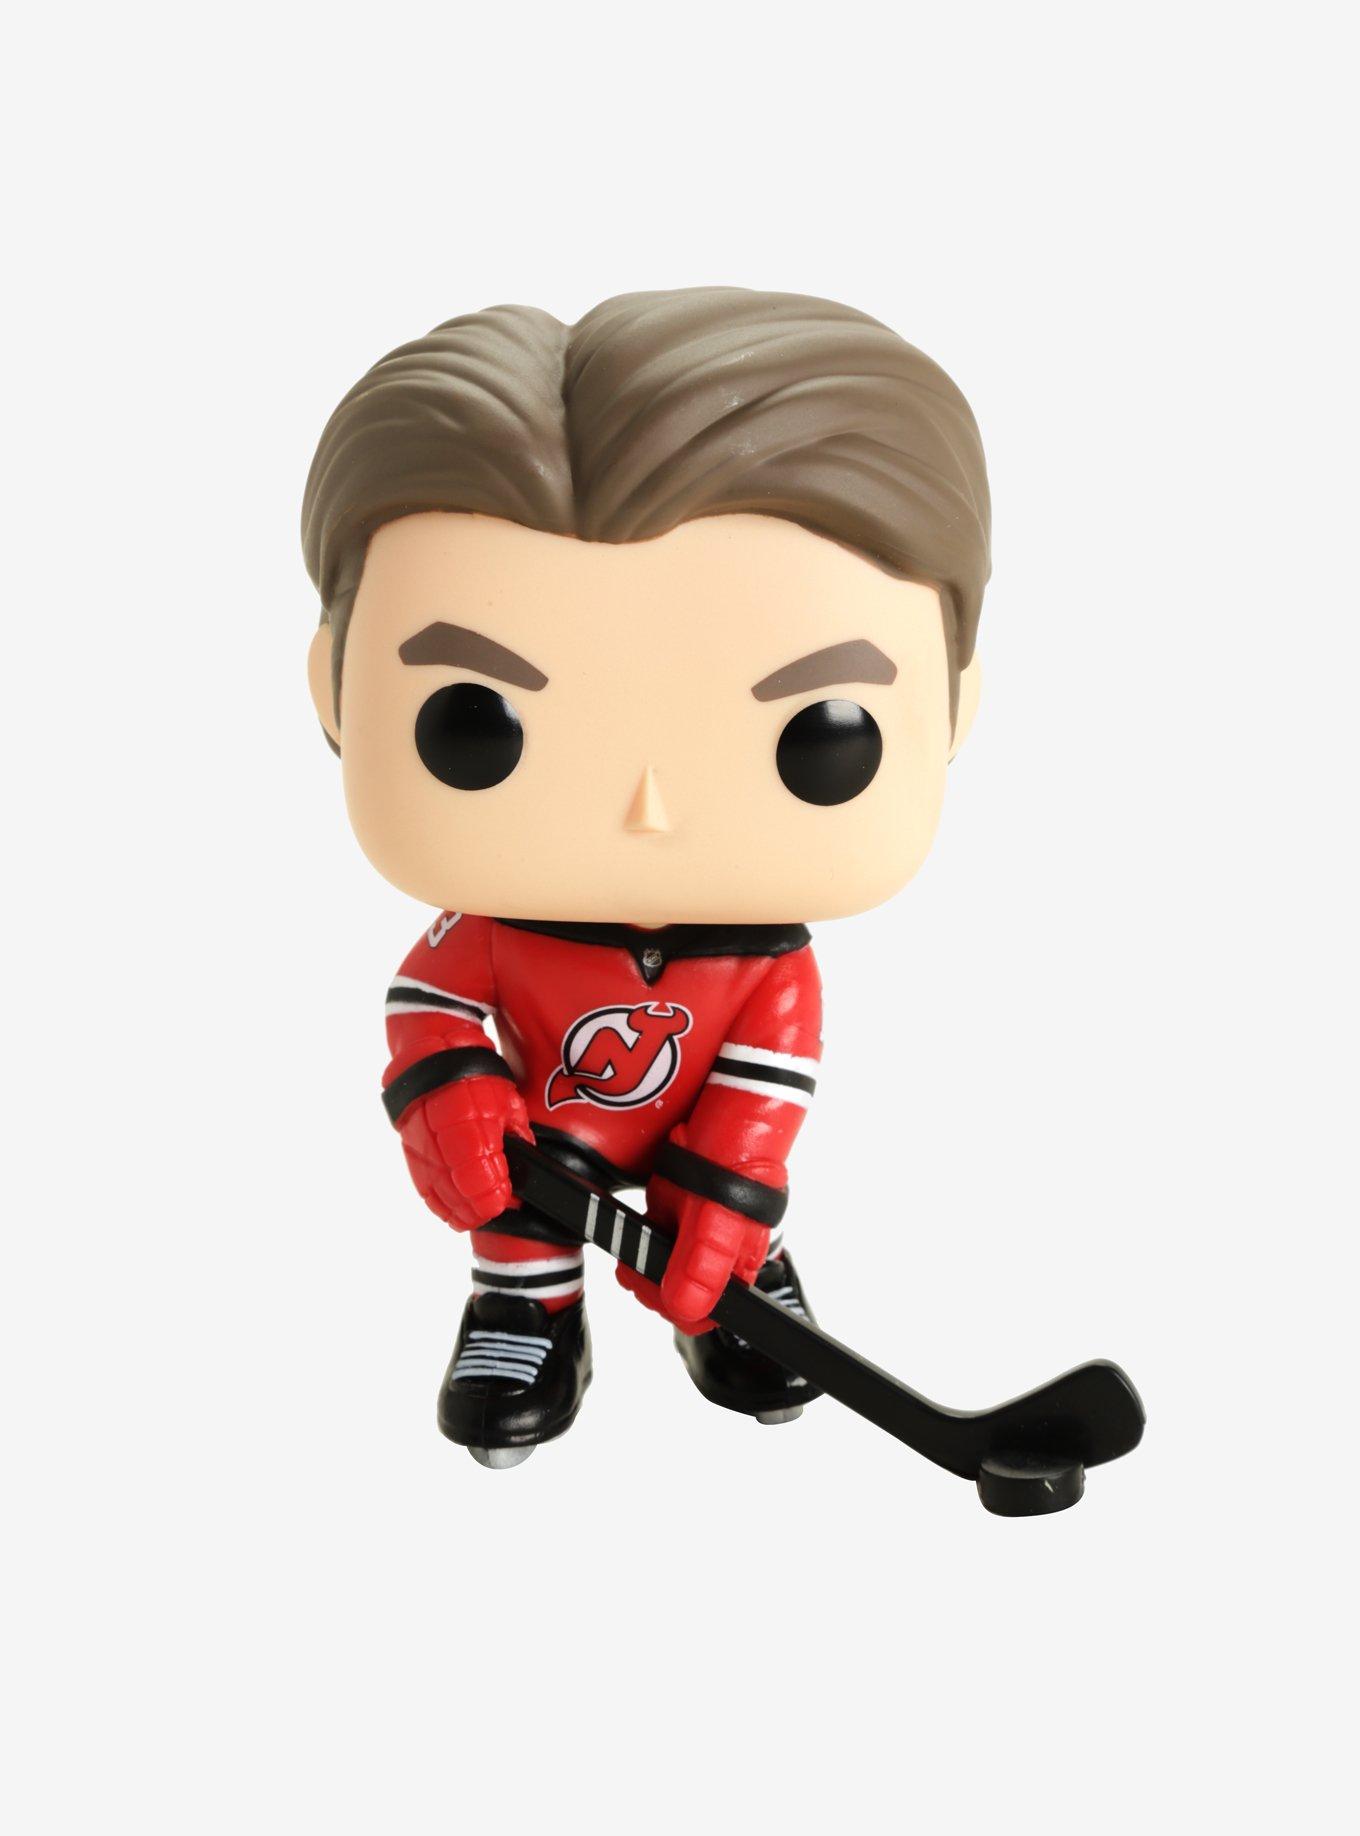 Nico Hischier New Jersey Devils Autographed Funko Pop! Figurine - Limited  Edition of 100 - Fanatics Exclusive